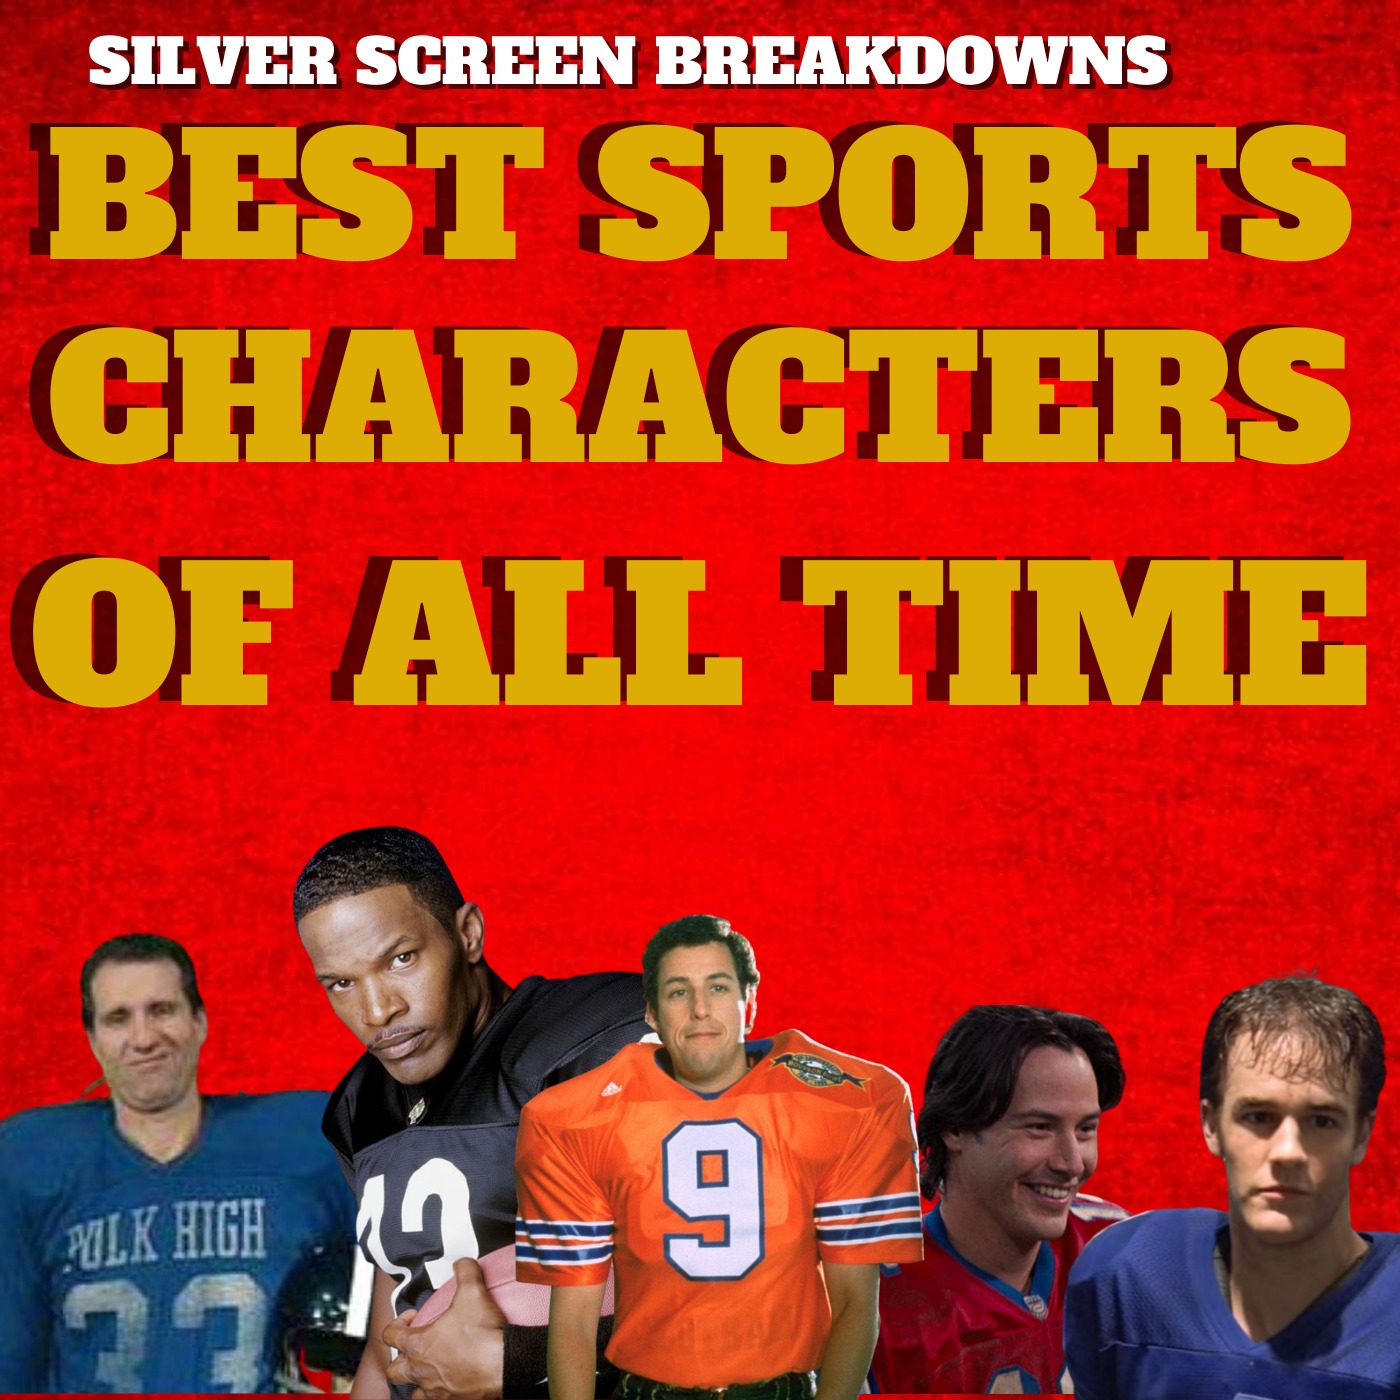 Best Sports Characters of All Time Image